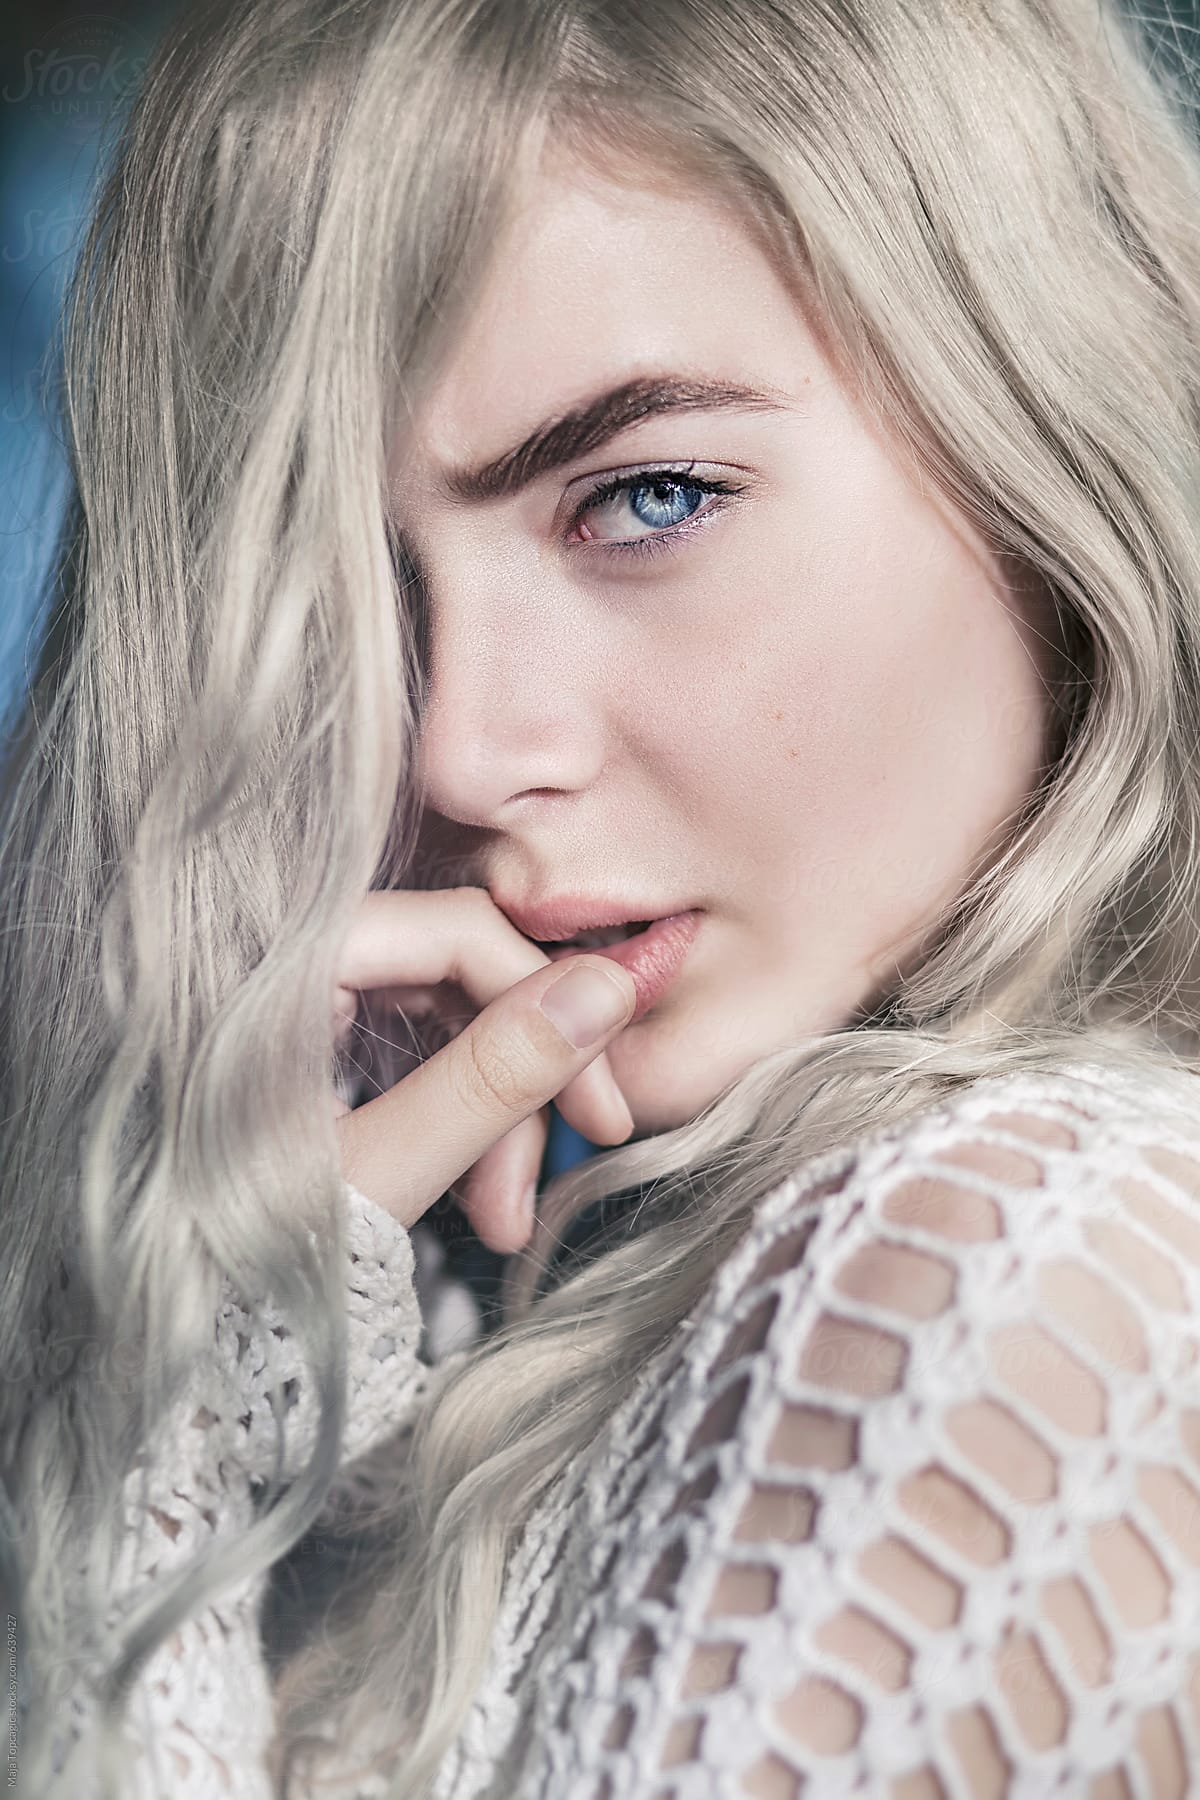 Young Beautiful Woman With Grey Hair And Blue Eyes